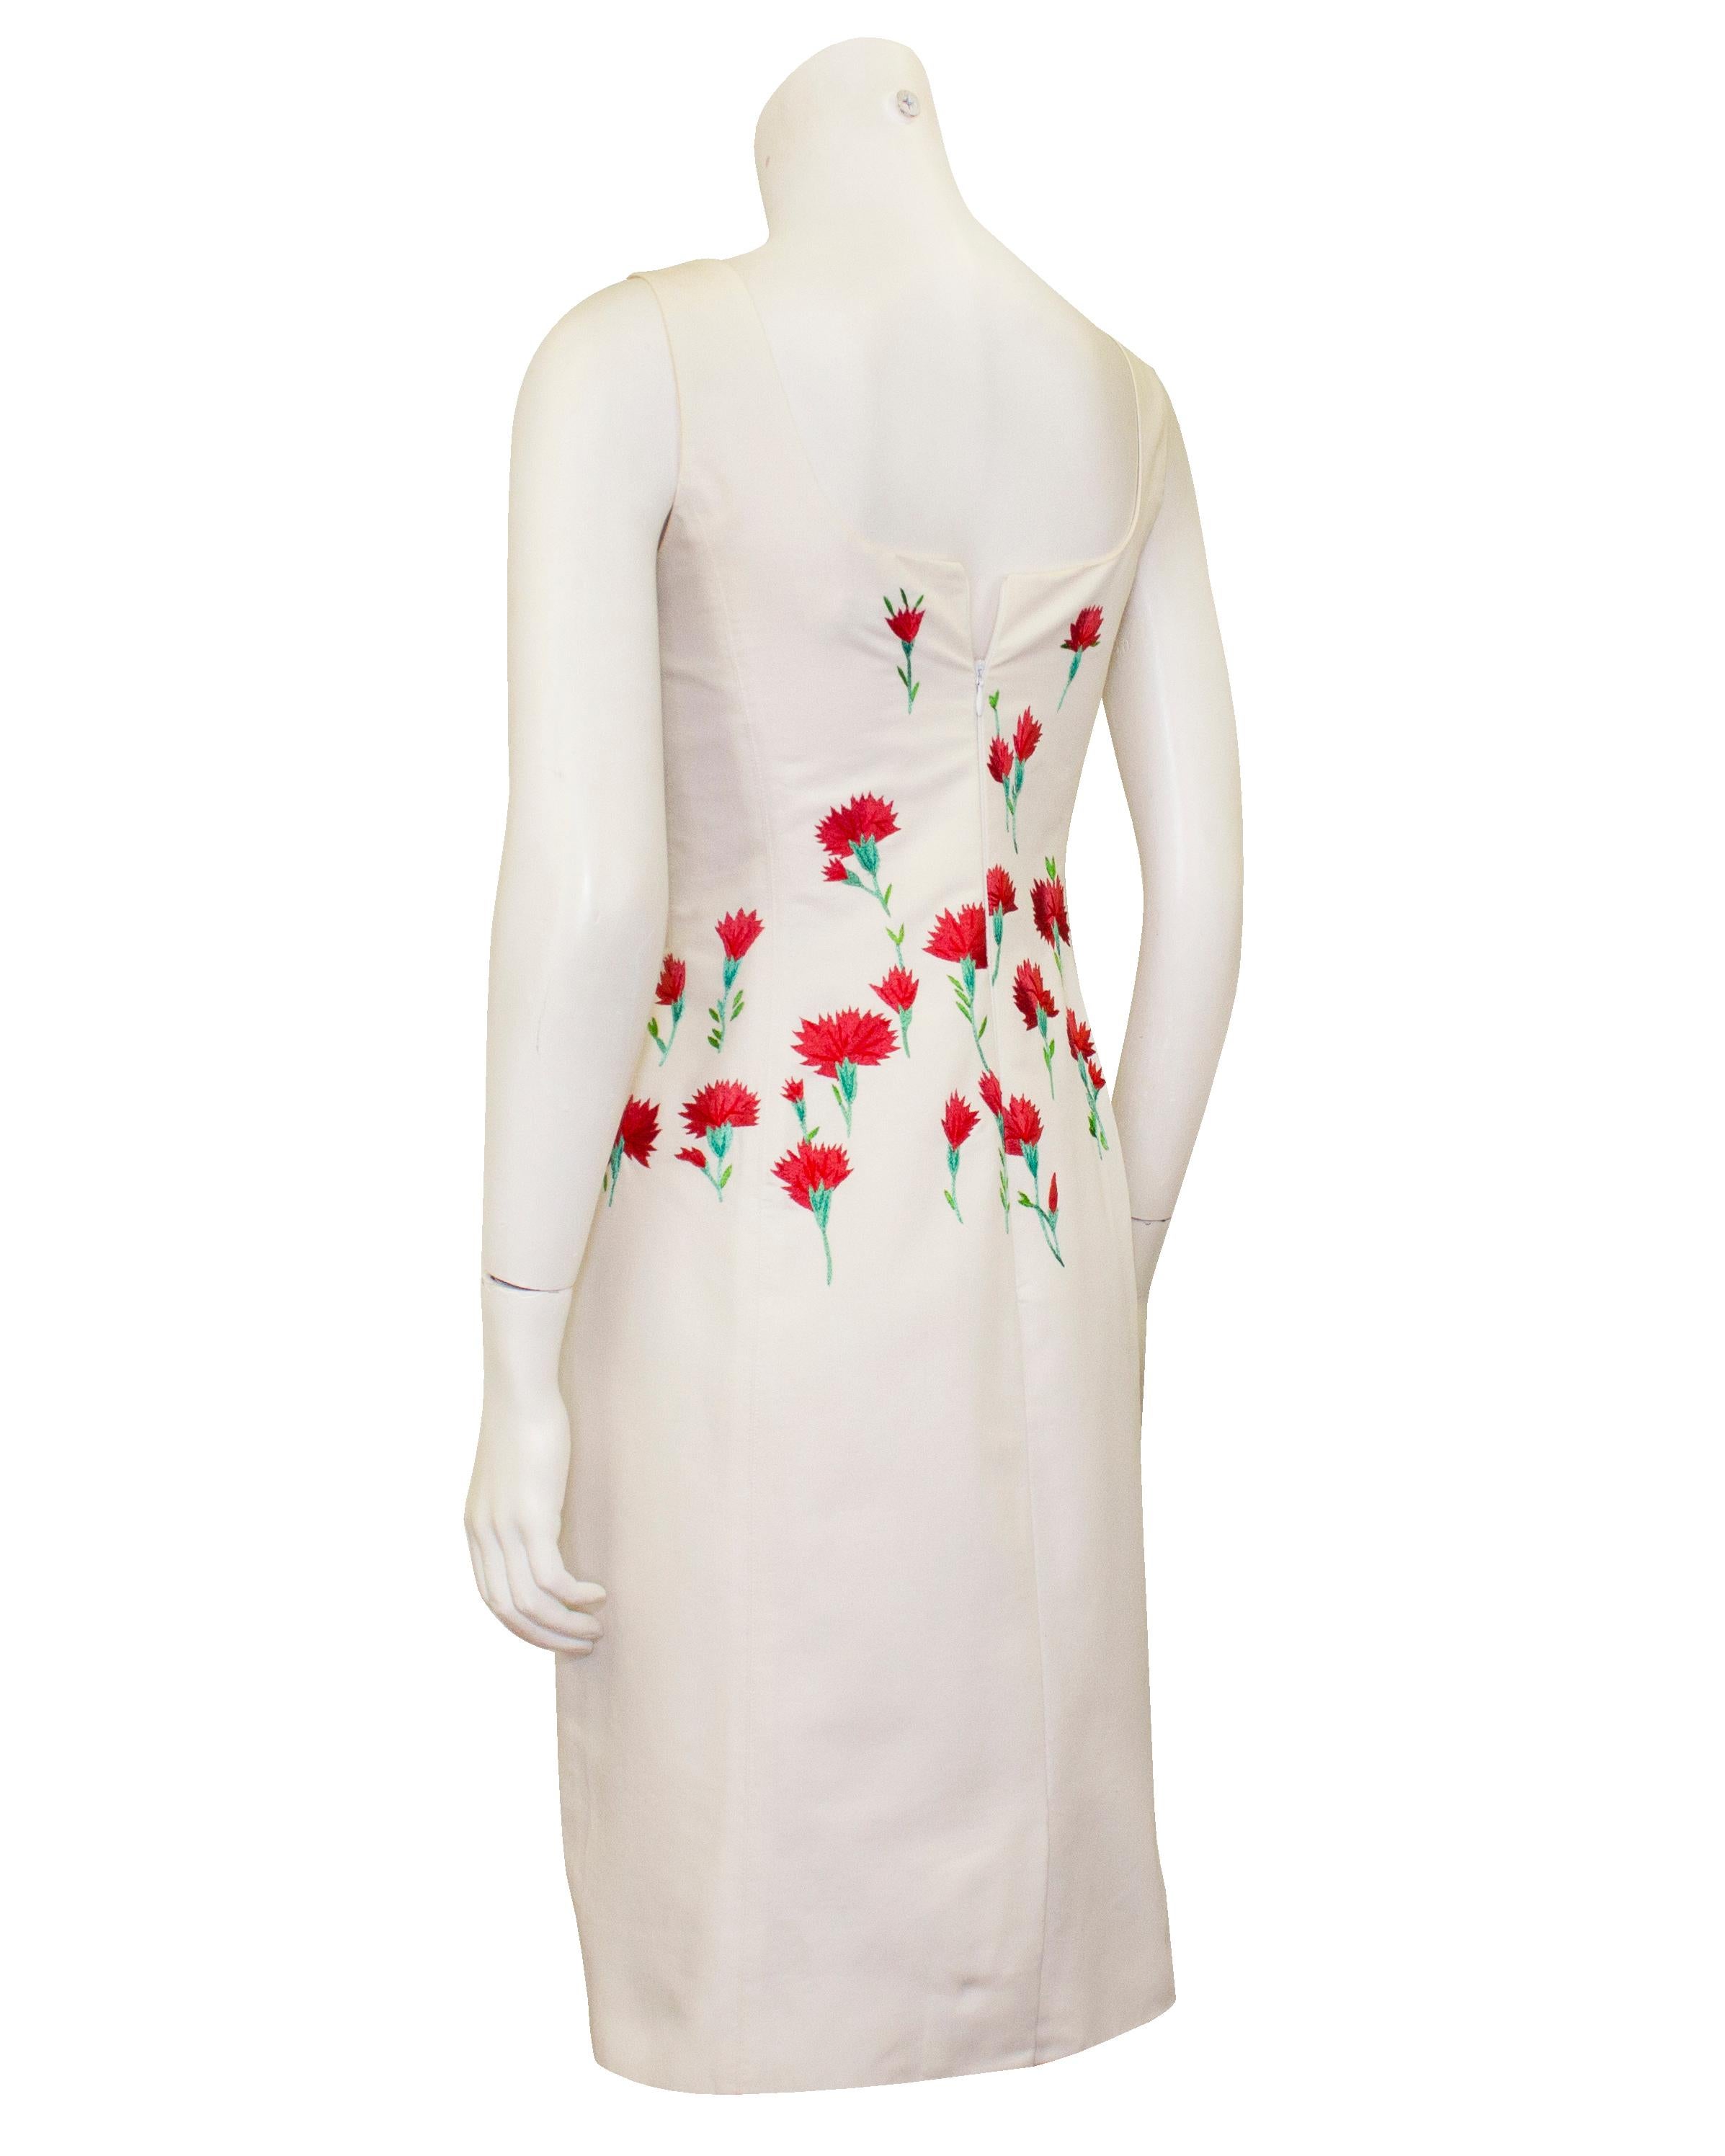 Early 2000s Oscar de la Renta Carnation Embroidered Dress and Cardigan Ensemble  For Sale 3